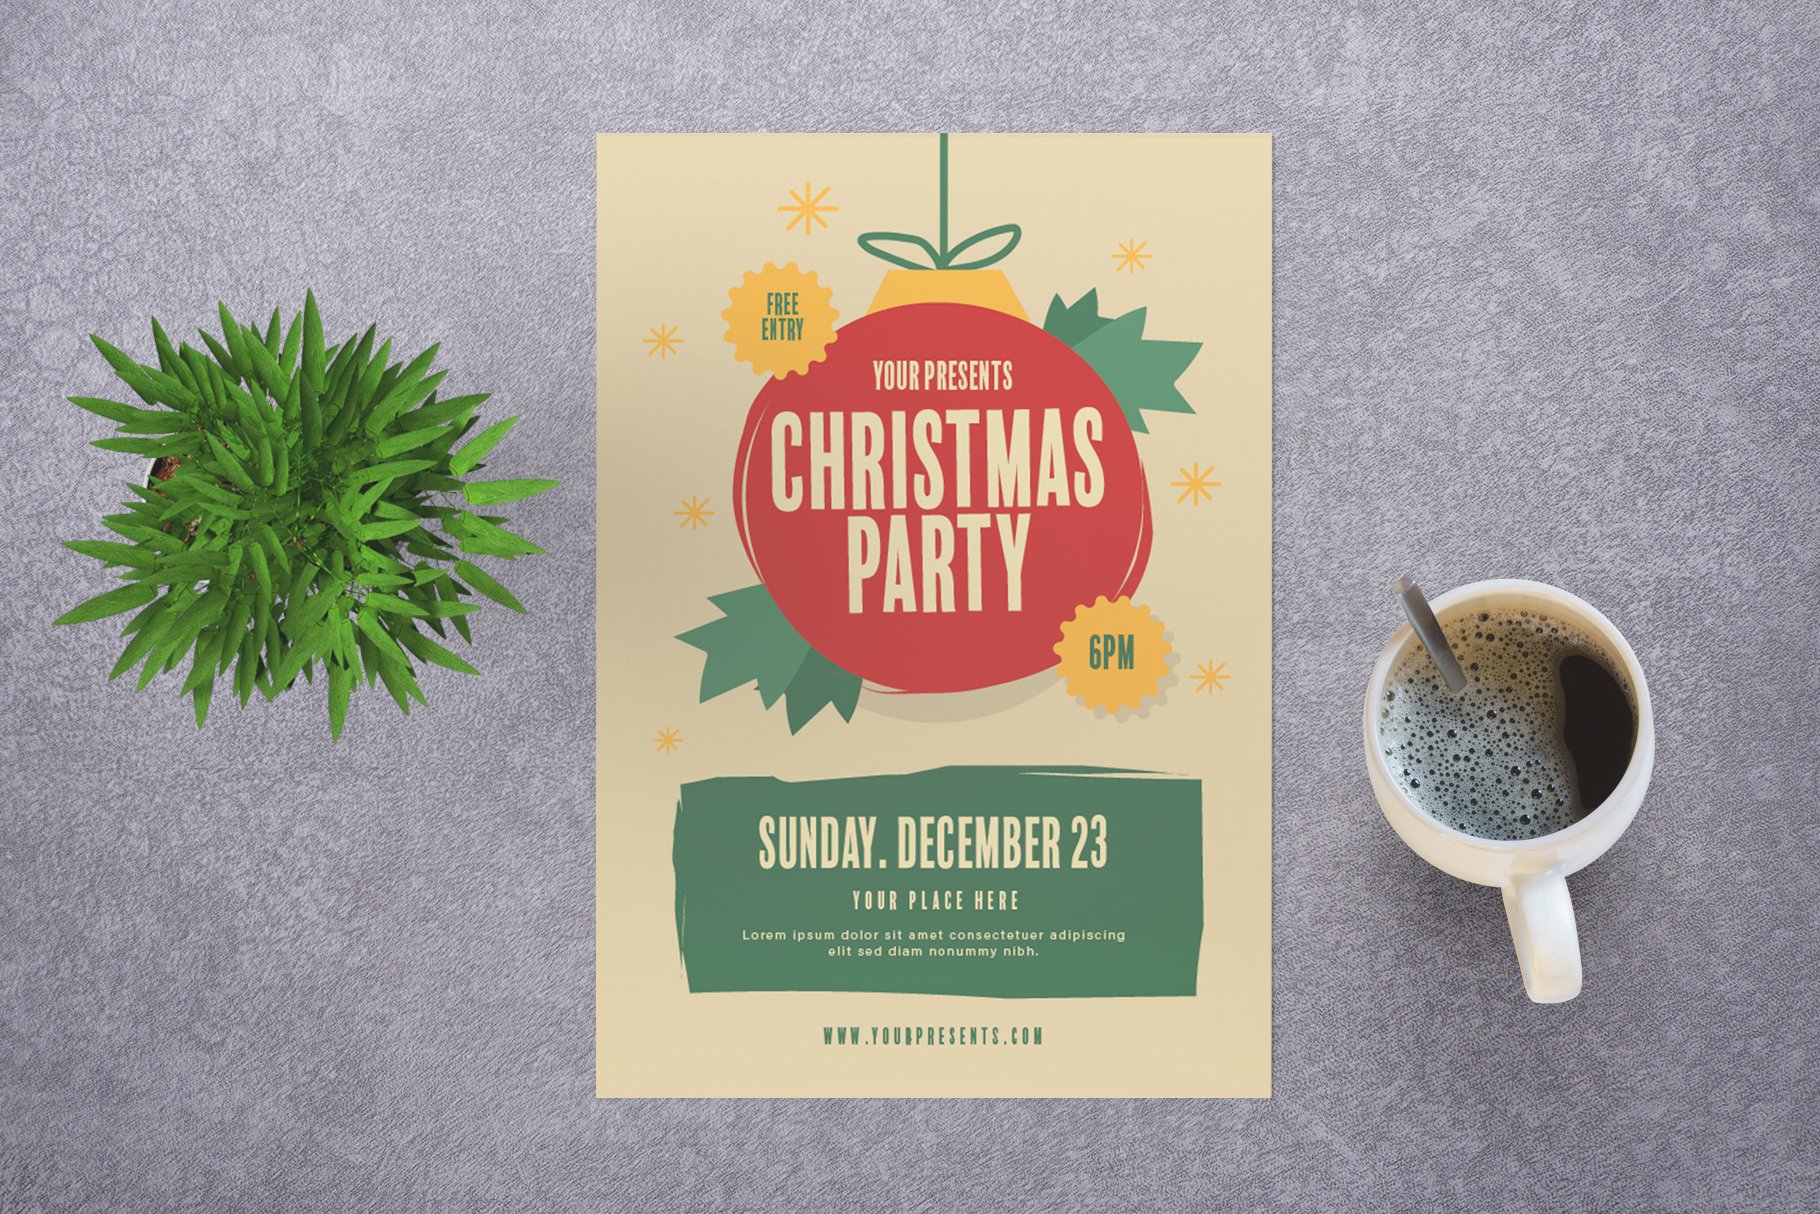 Christmas Party cover image.